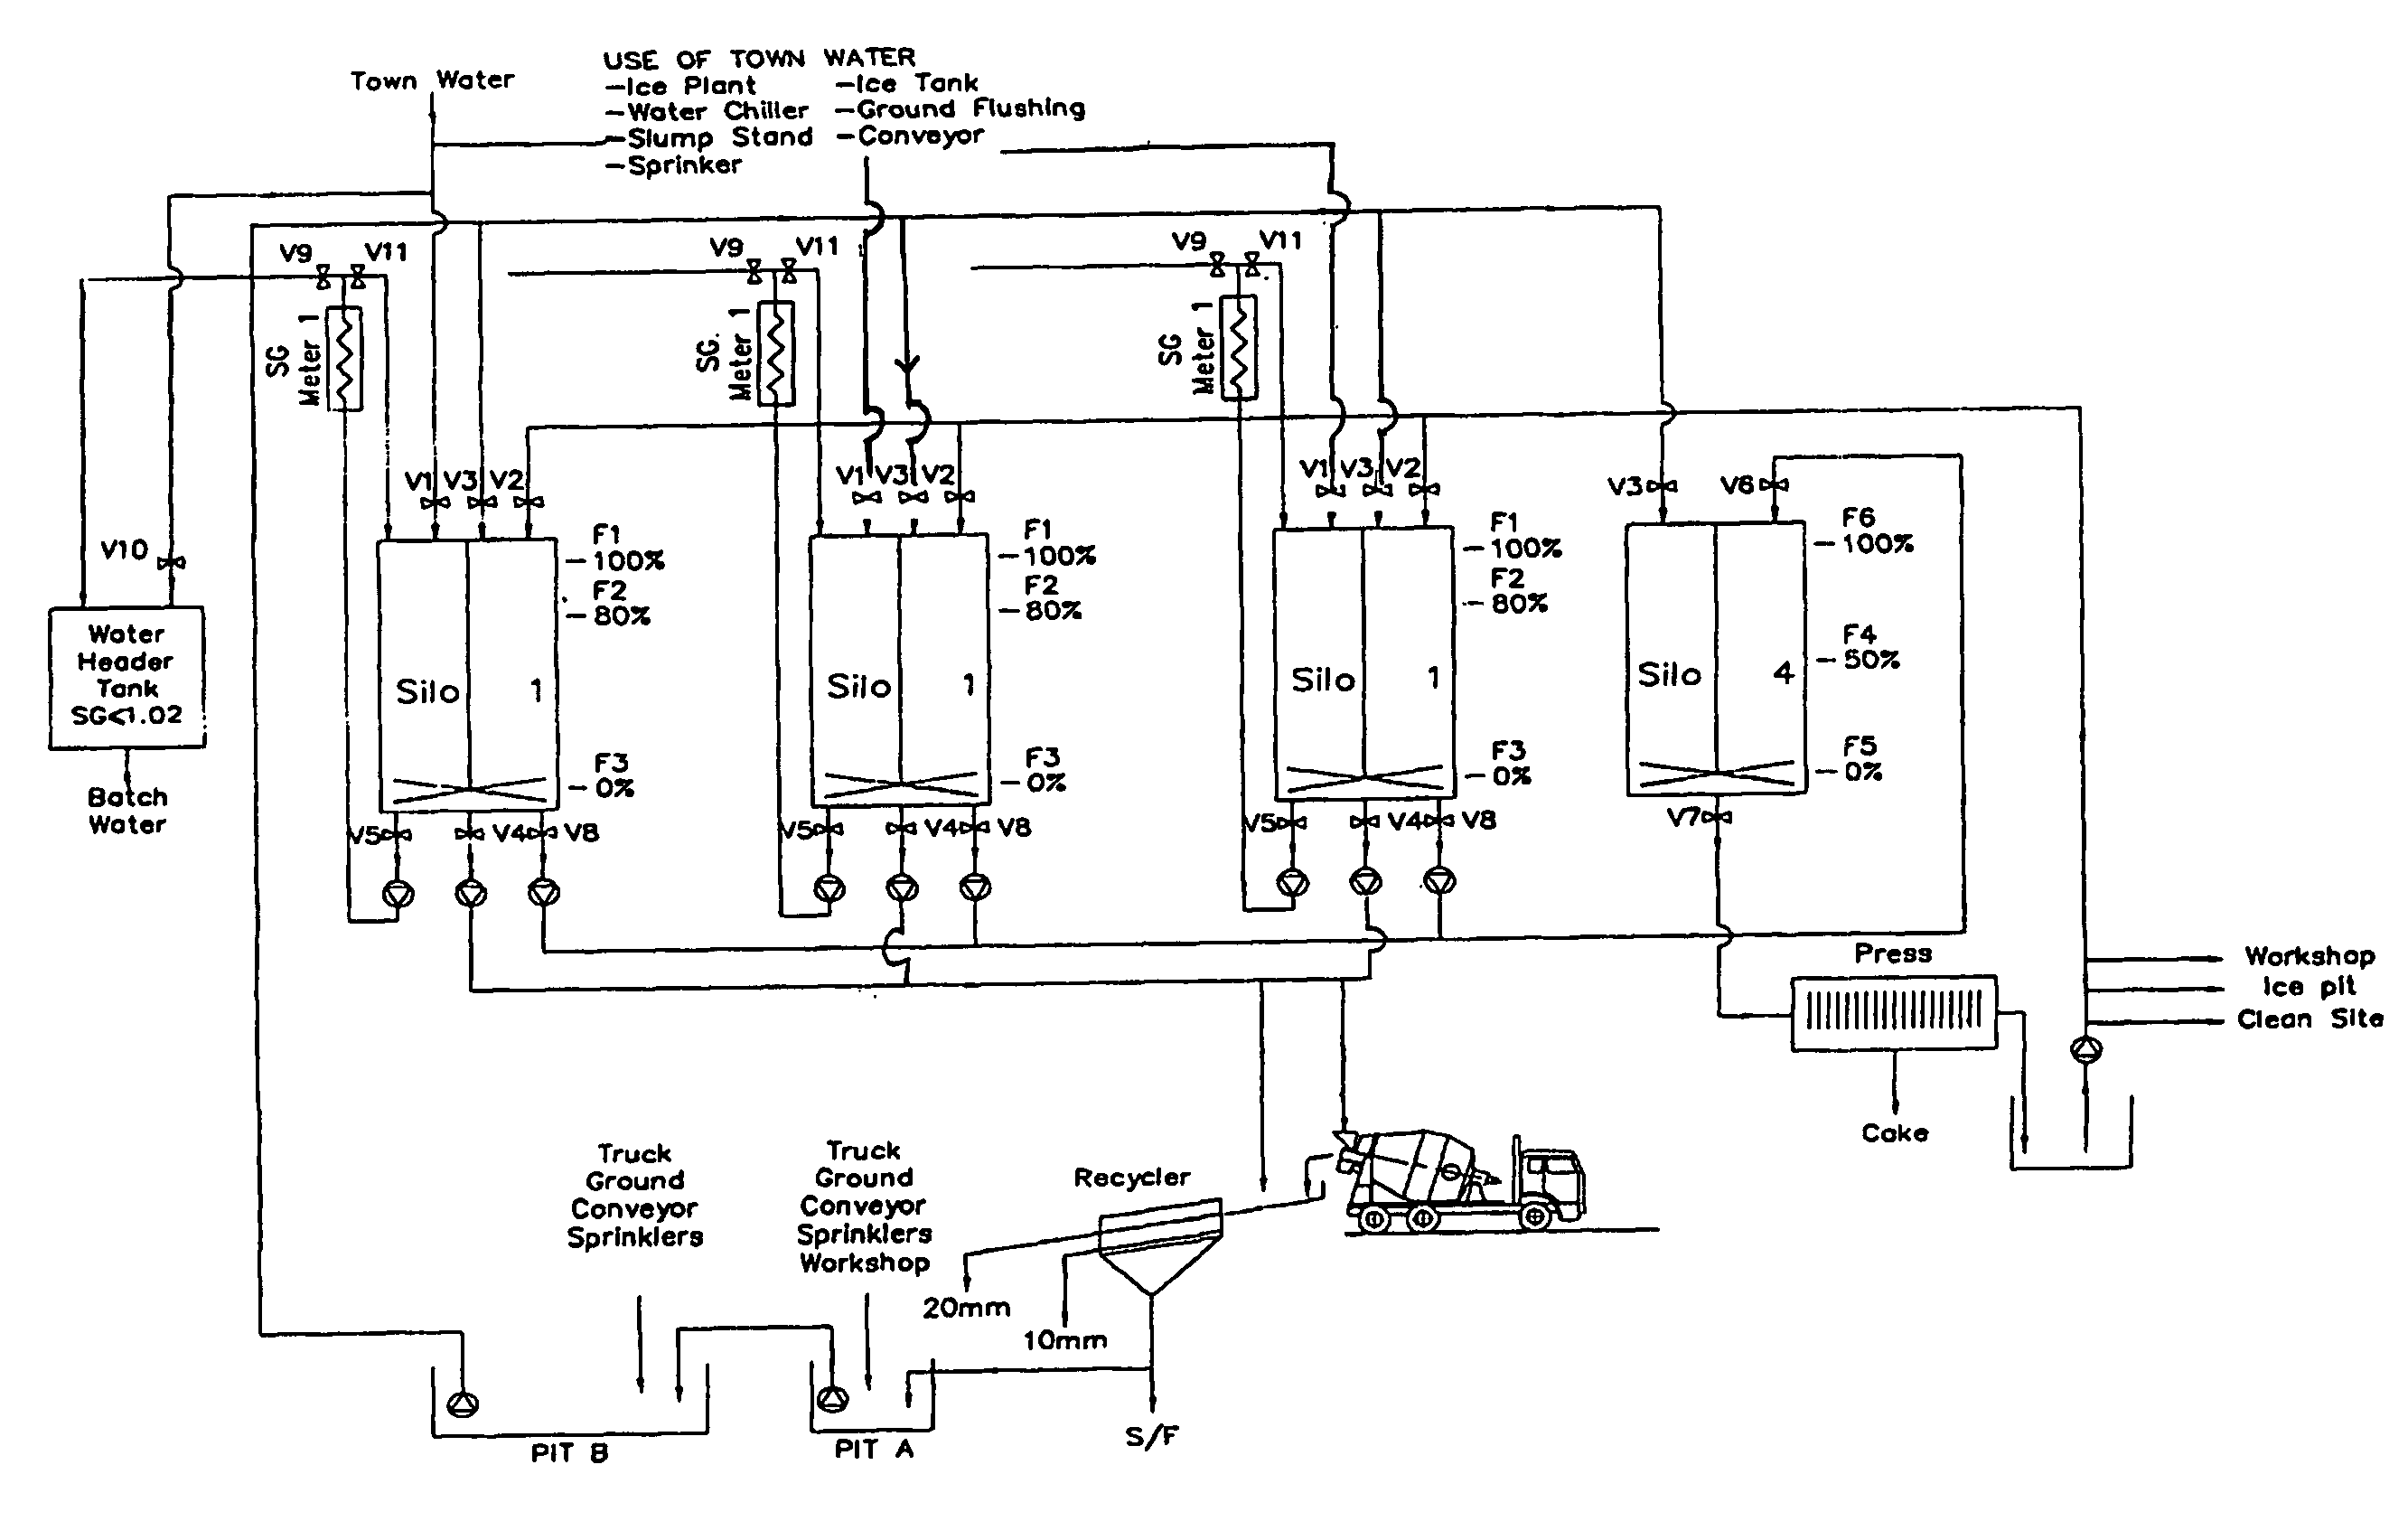 Process for operating a water recovery plant